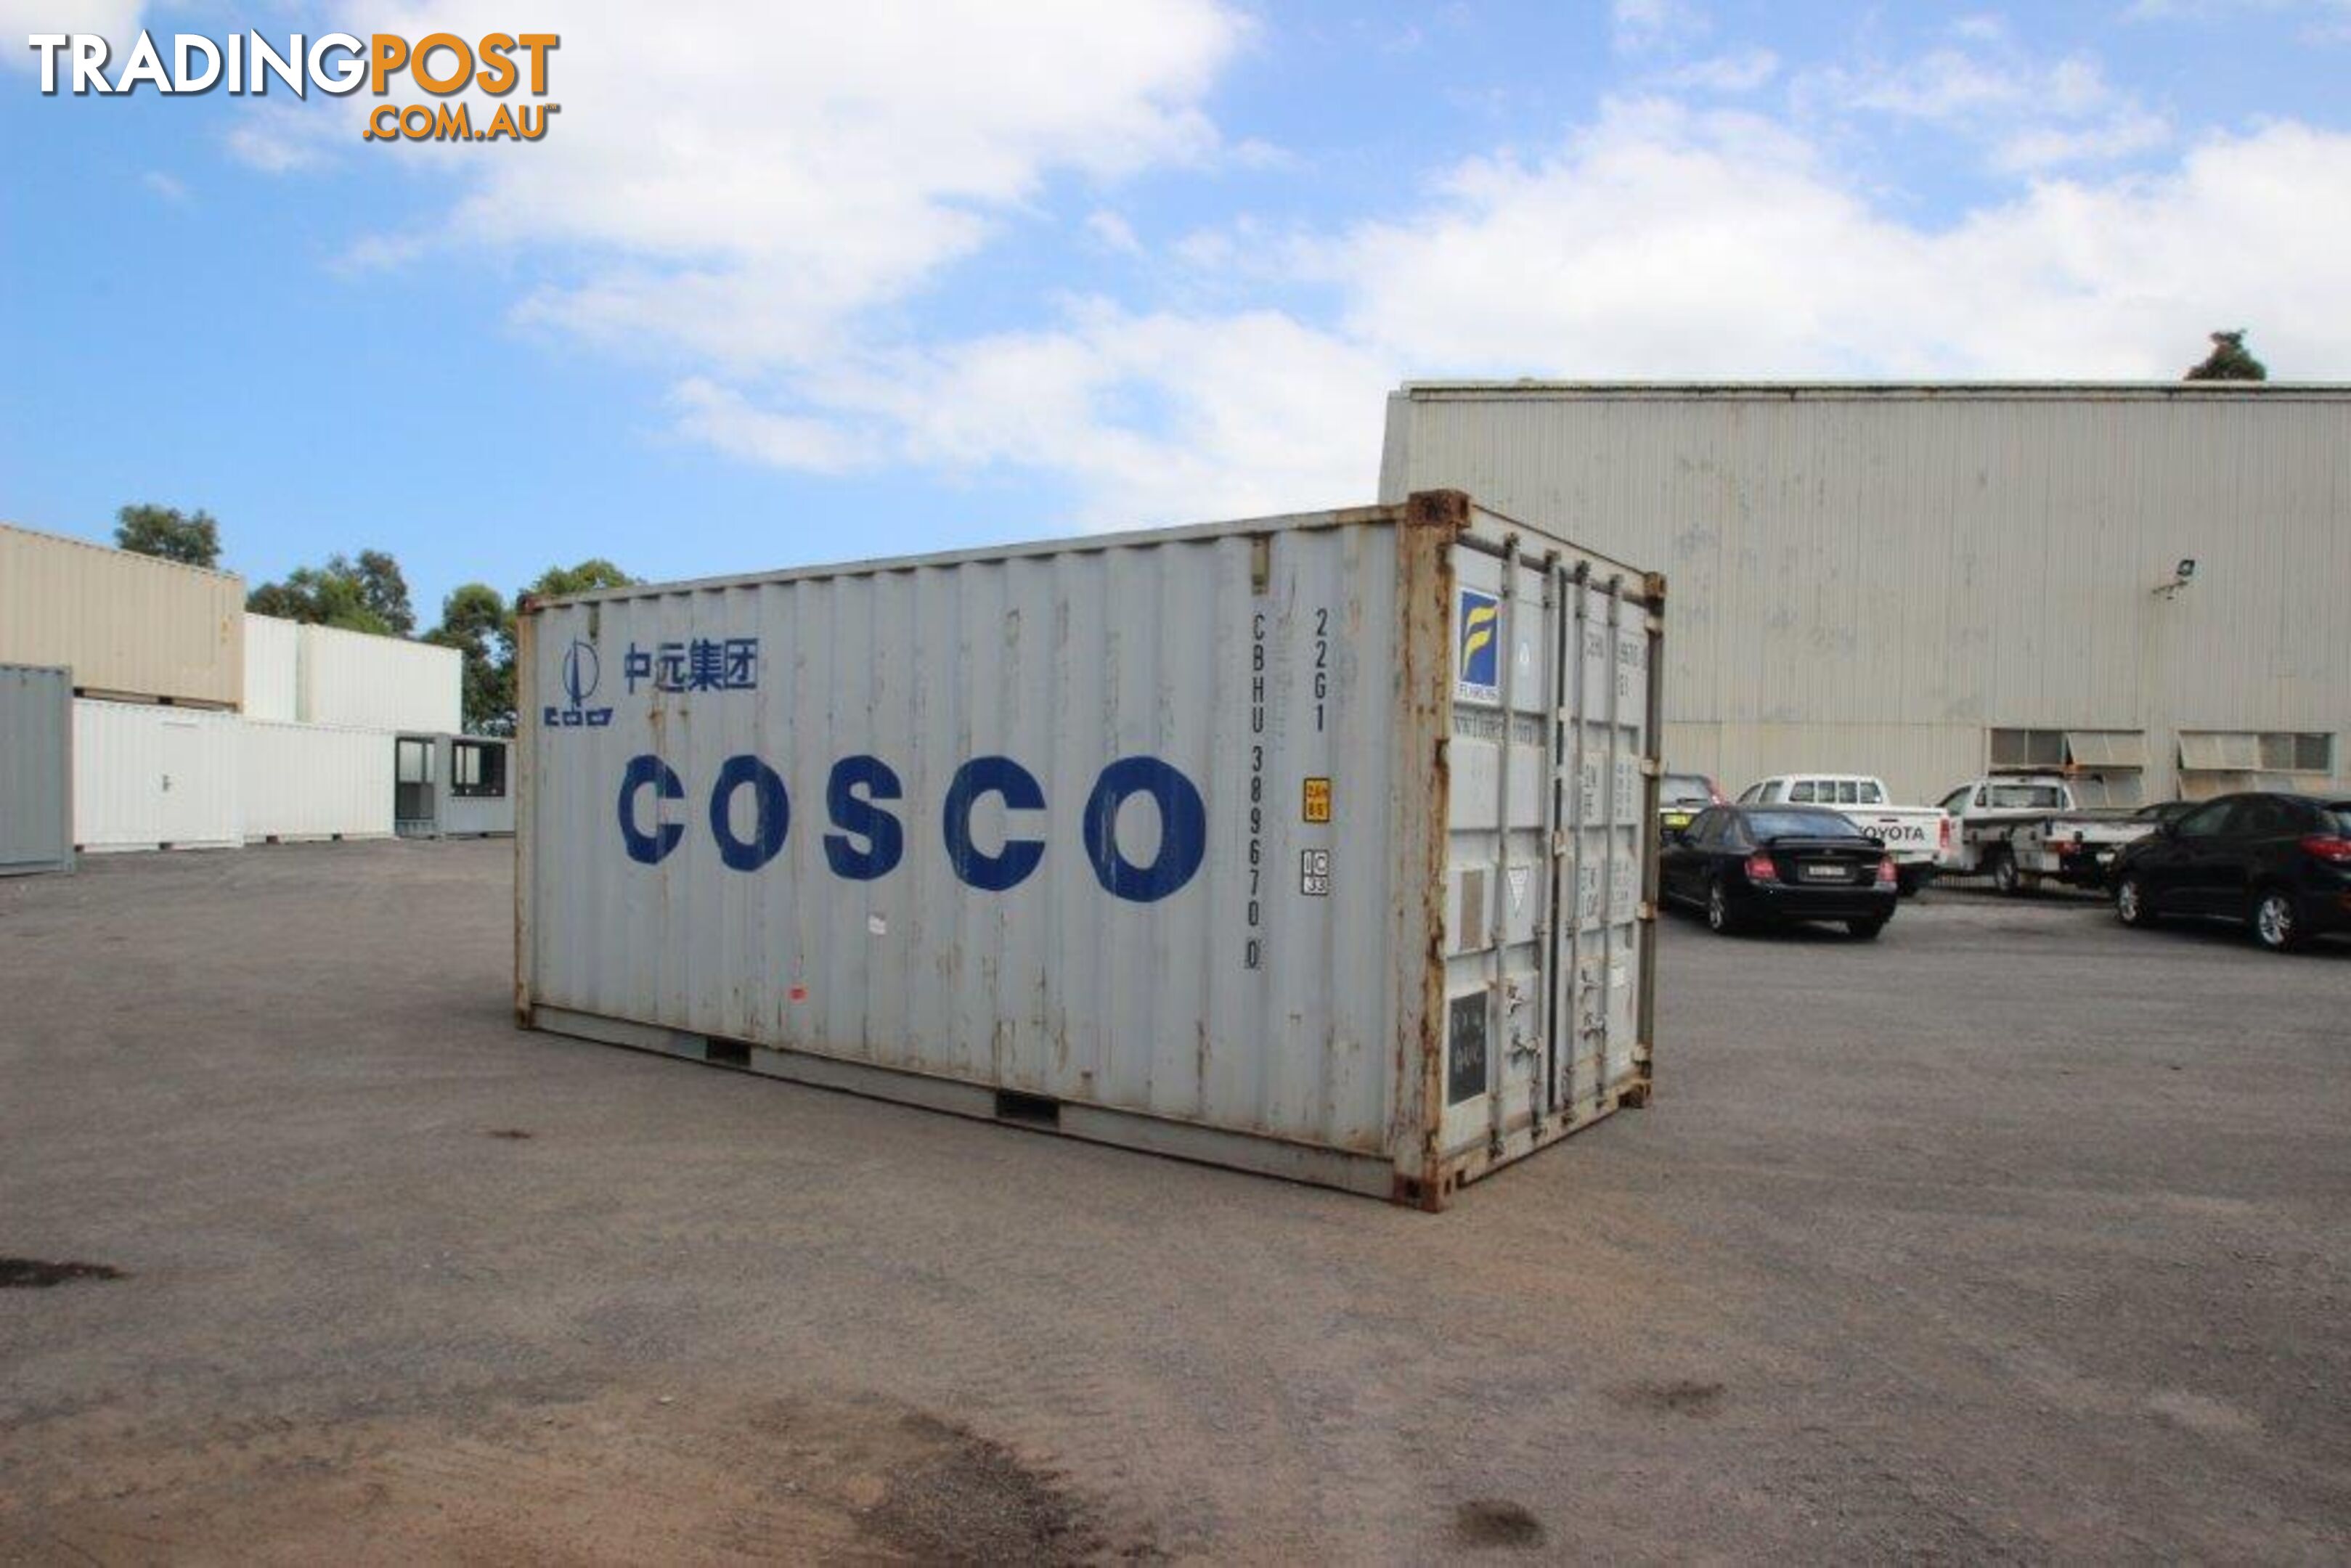 Used 20ft Shipping Containers Cessnock - From $3650 + GST